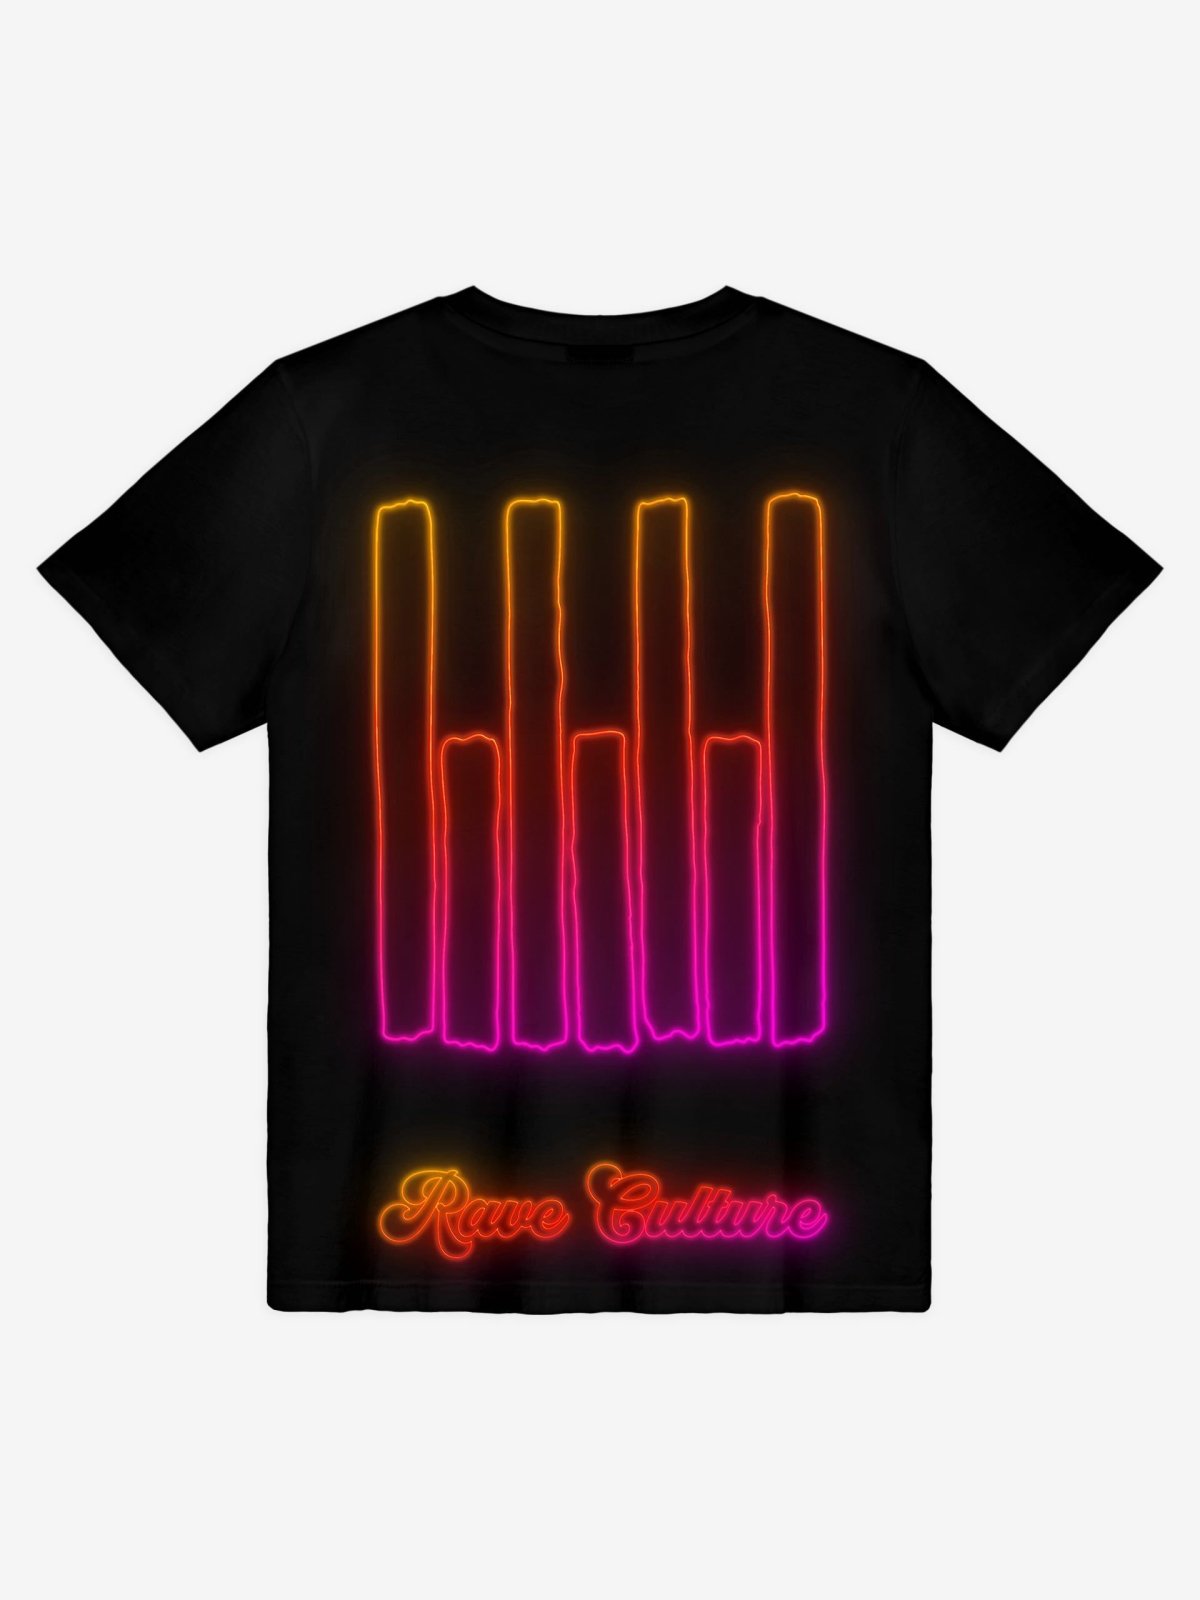 Rave Is Sexy T-Shirt - Rave Culture Shop